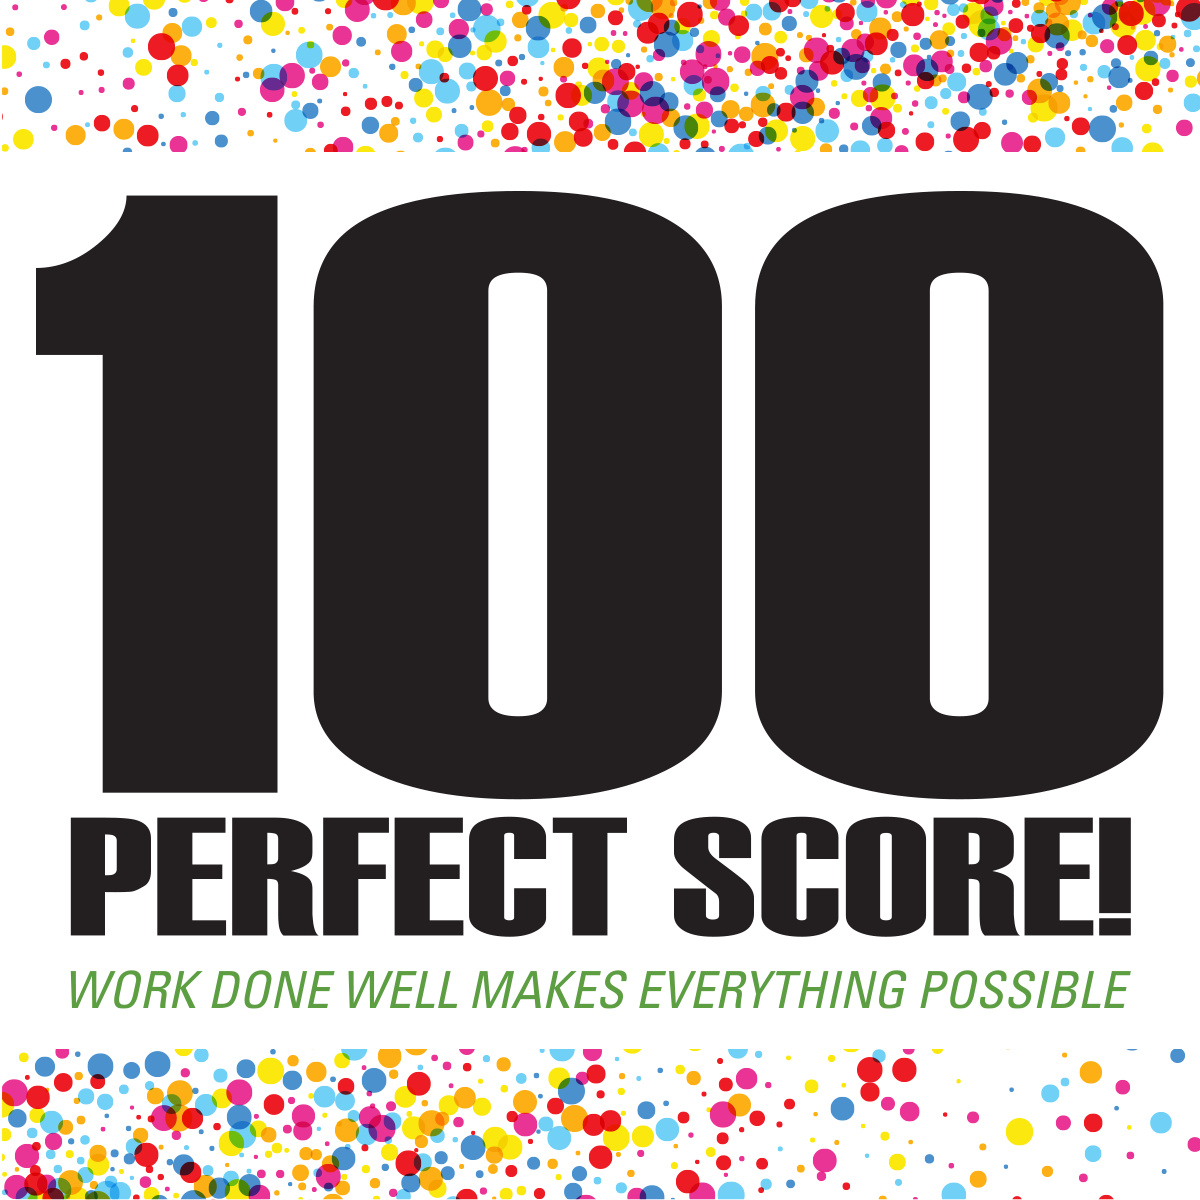 A banner that read 100 PERFECT SCORE